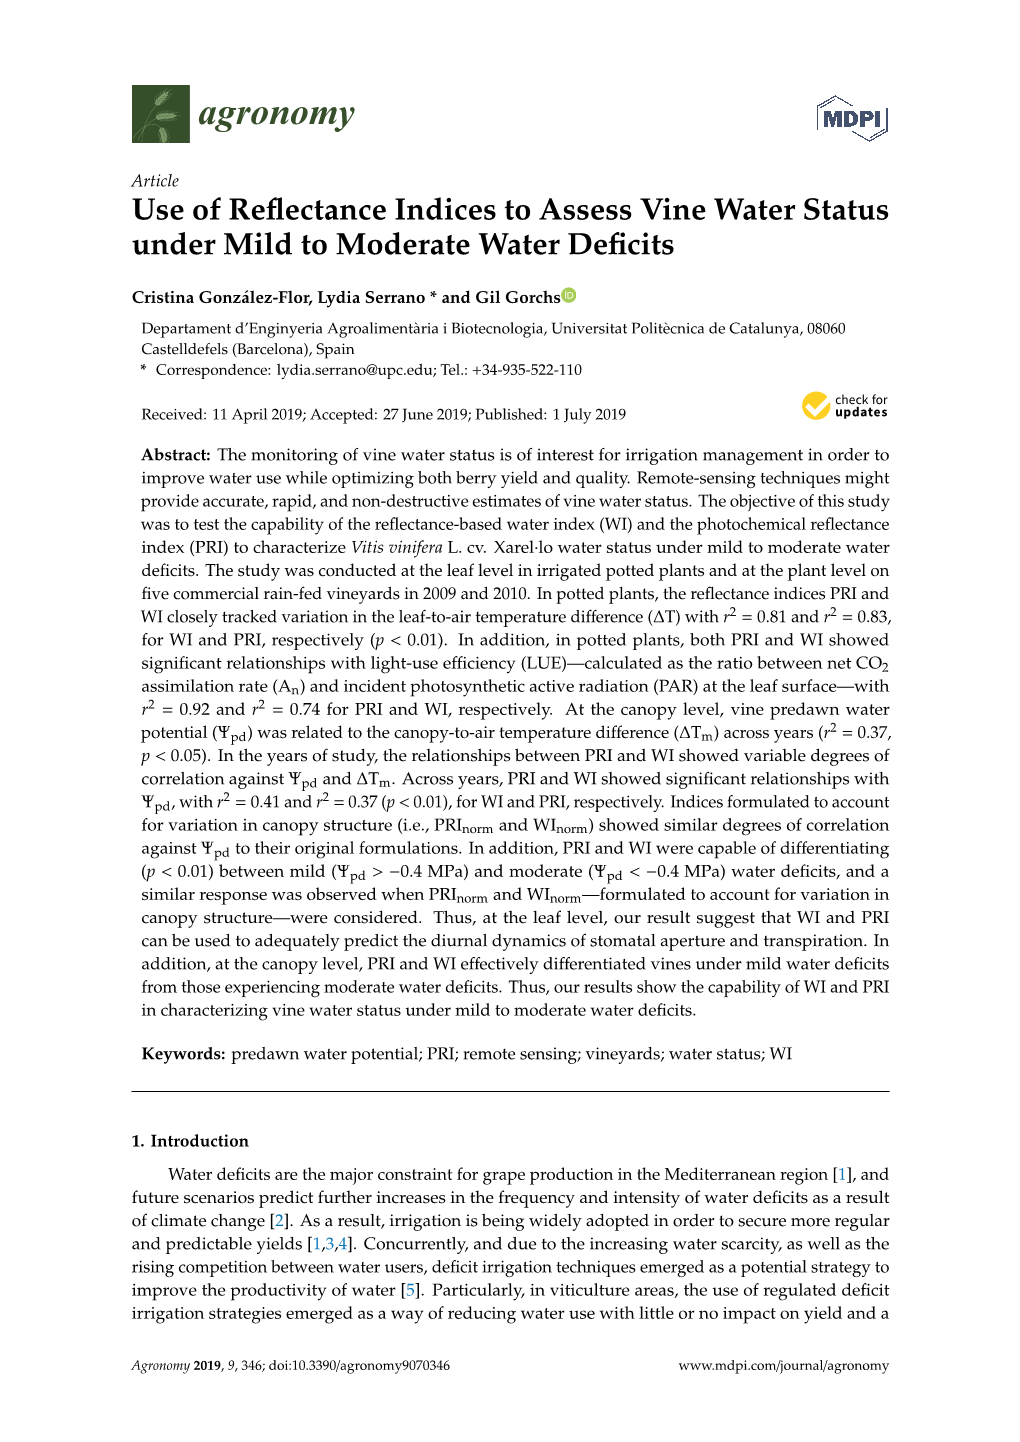 Use of Reflectance Indices to Assess Vine Water Status Under Mild To